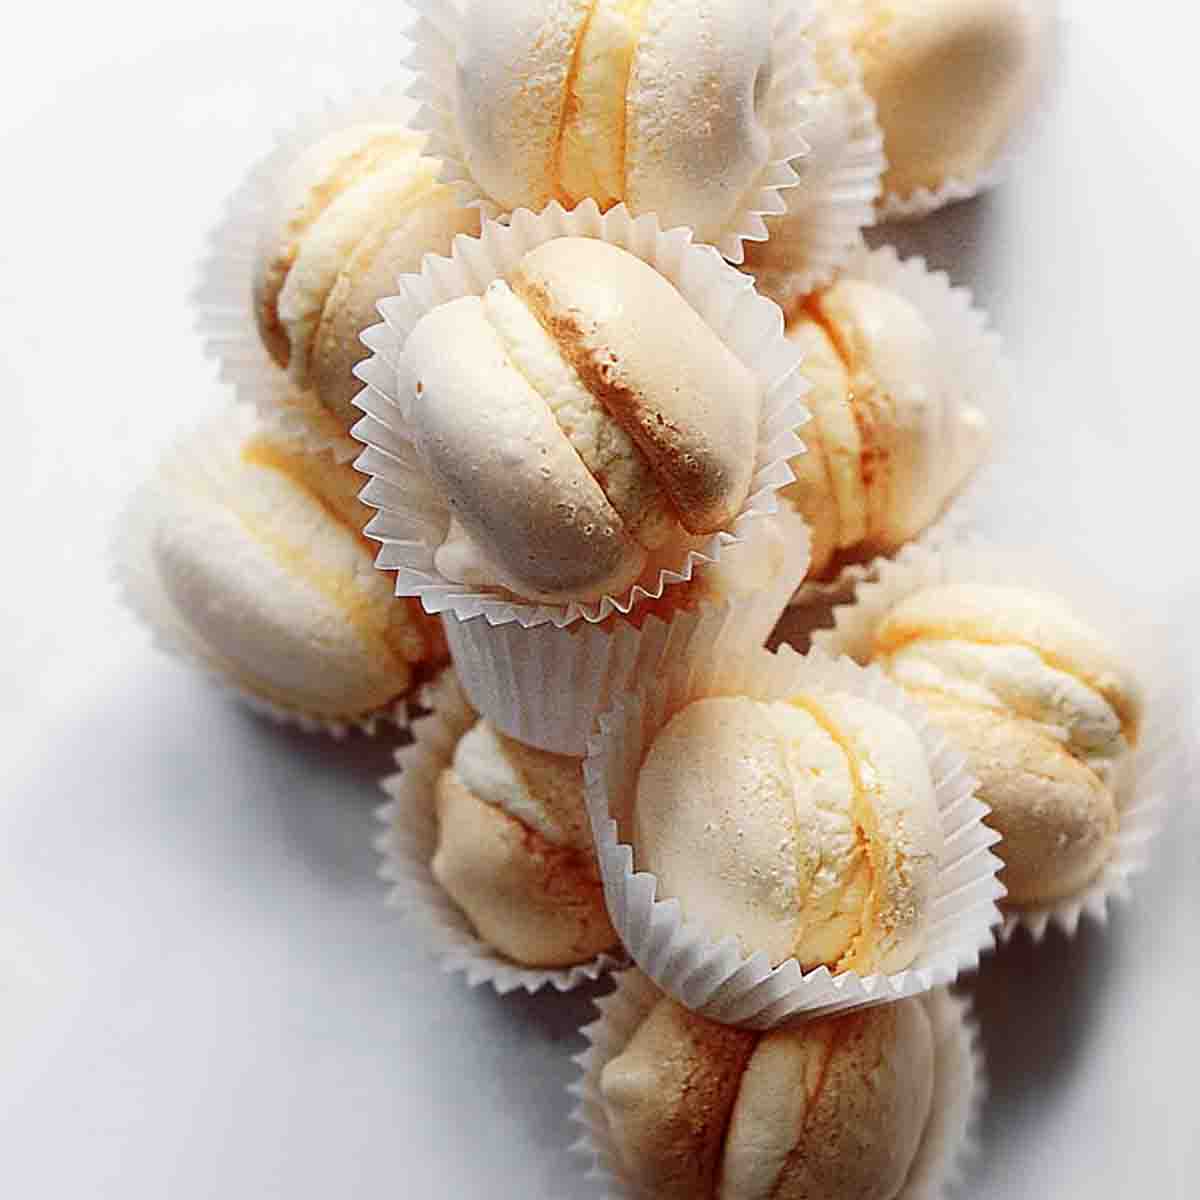 A pile of cream-filled macarons, each in a white wrapper.